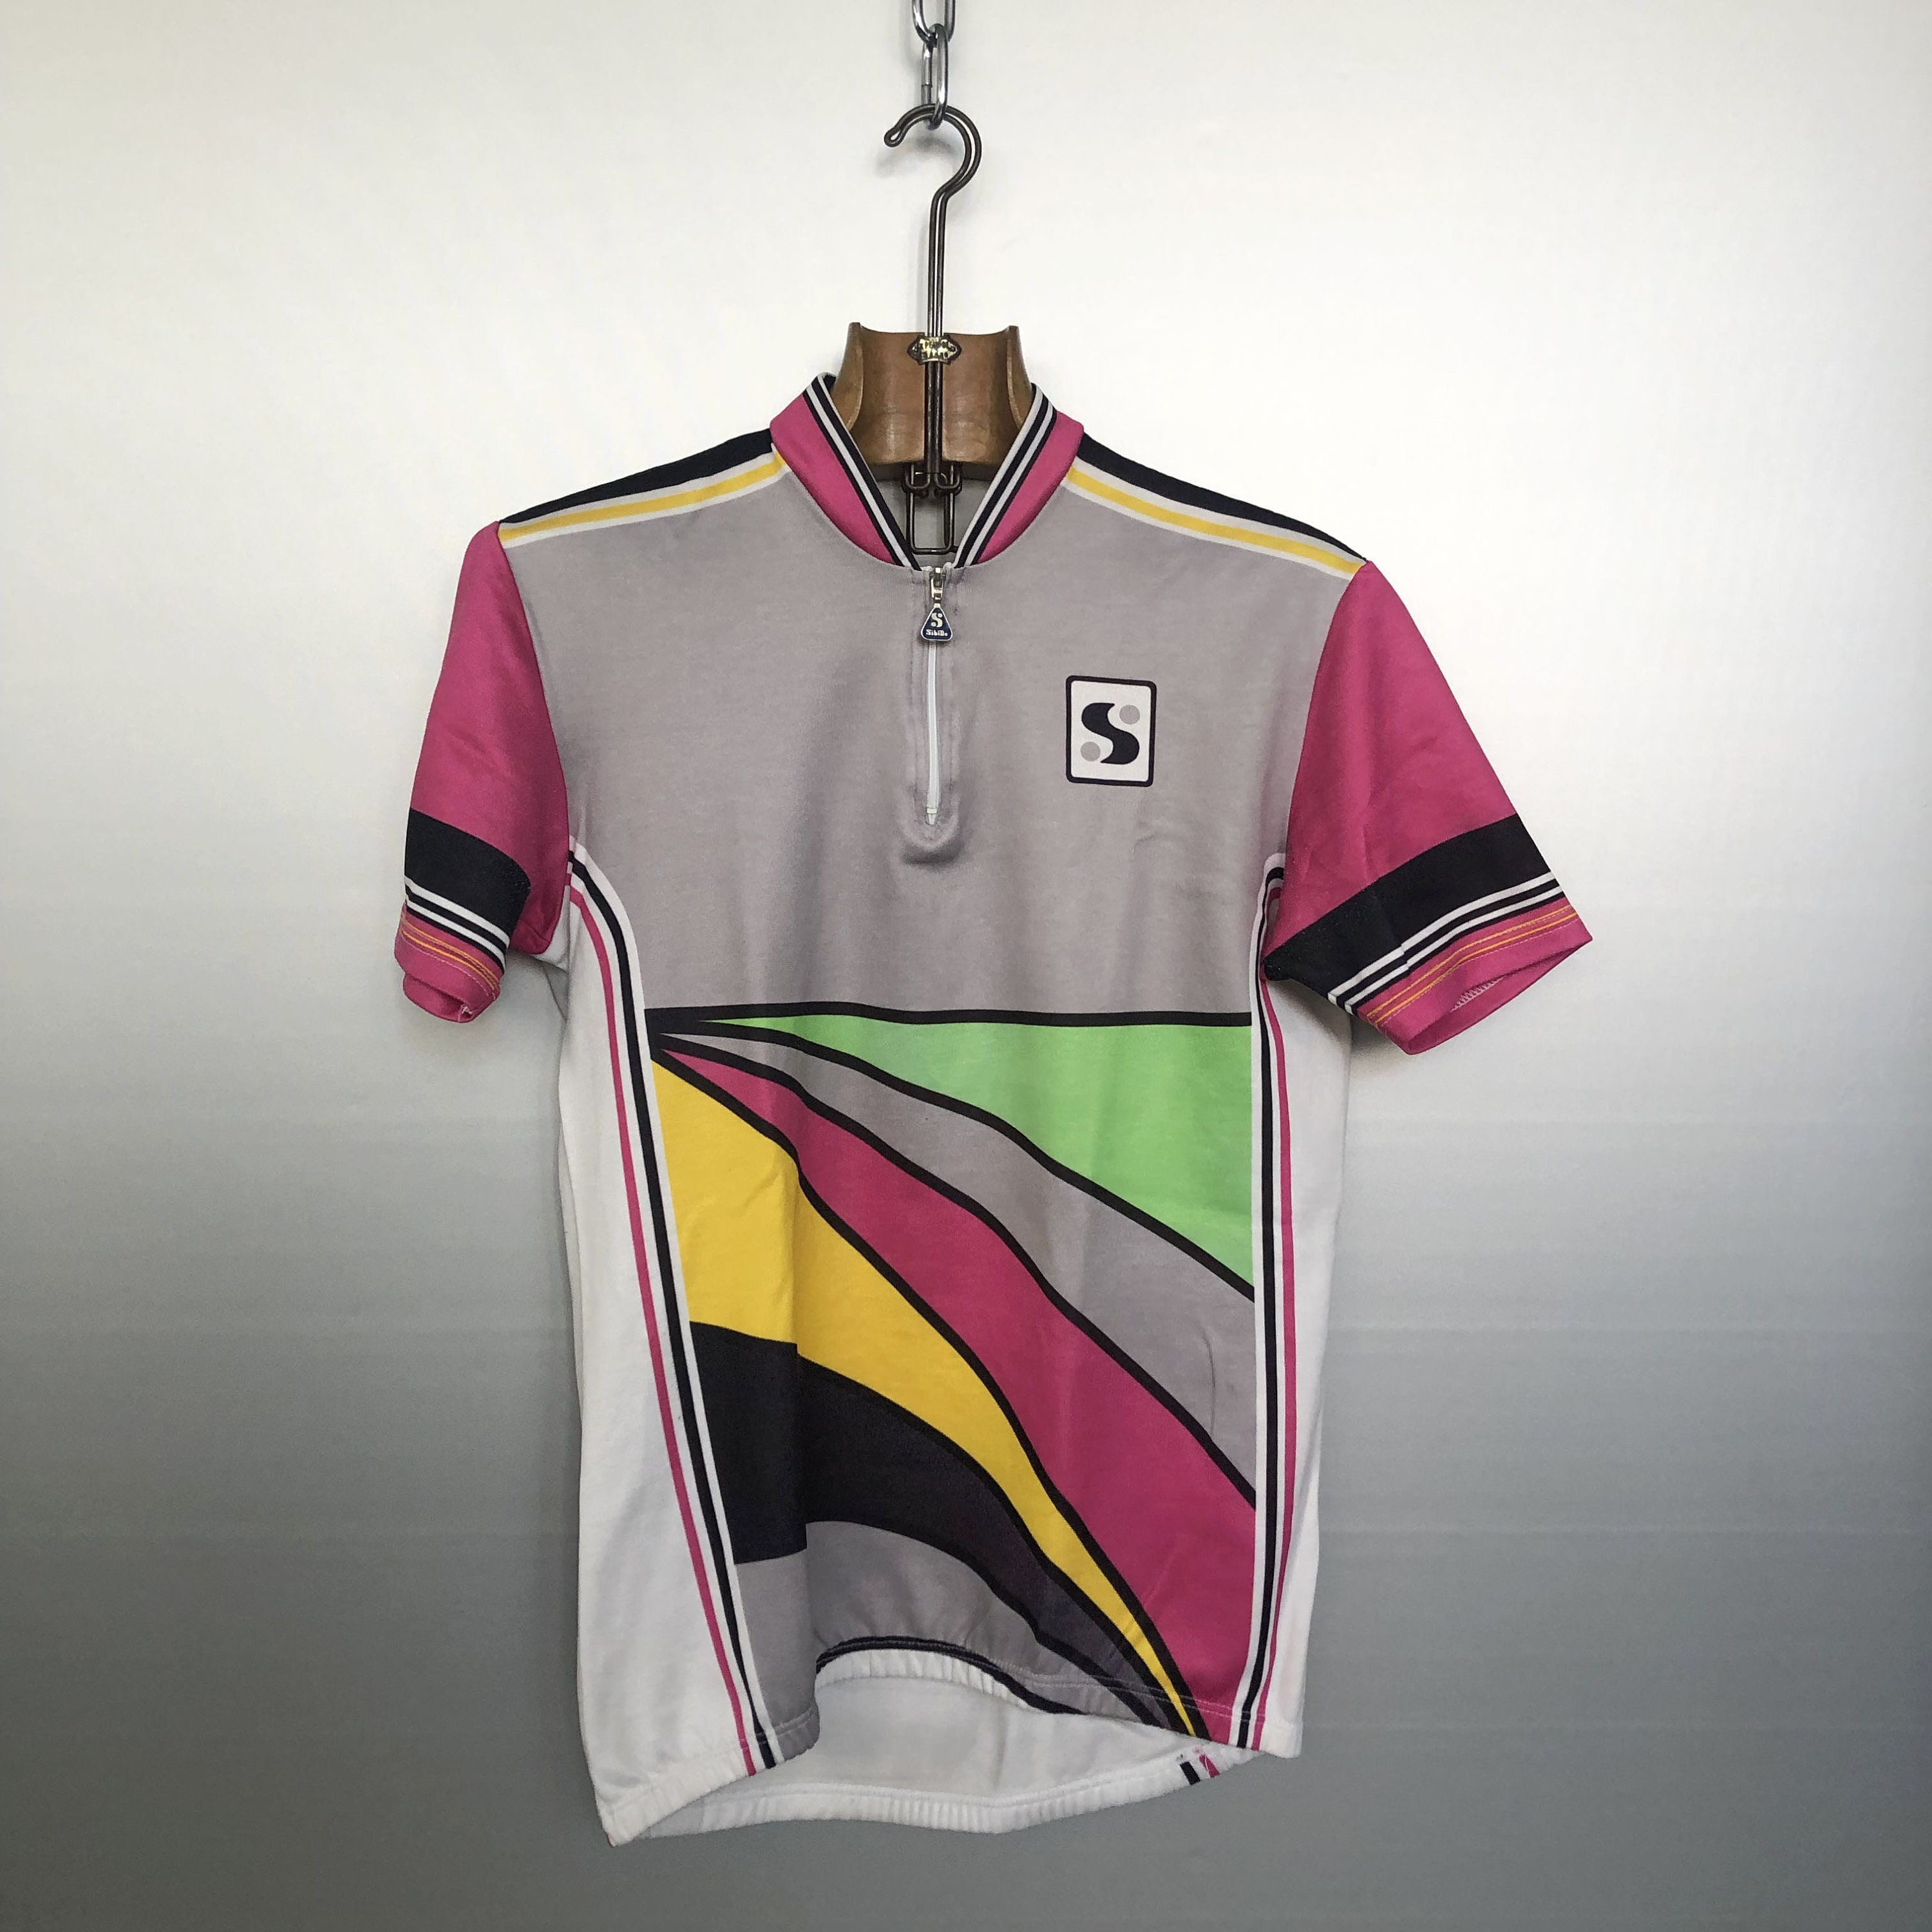 Rare Vintage 90s POLO SPORT Spell Out Bike Cycling Shirt Jersey 90s USA  made XL